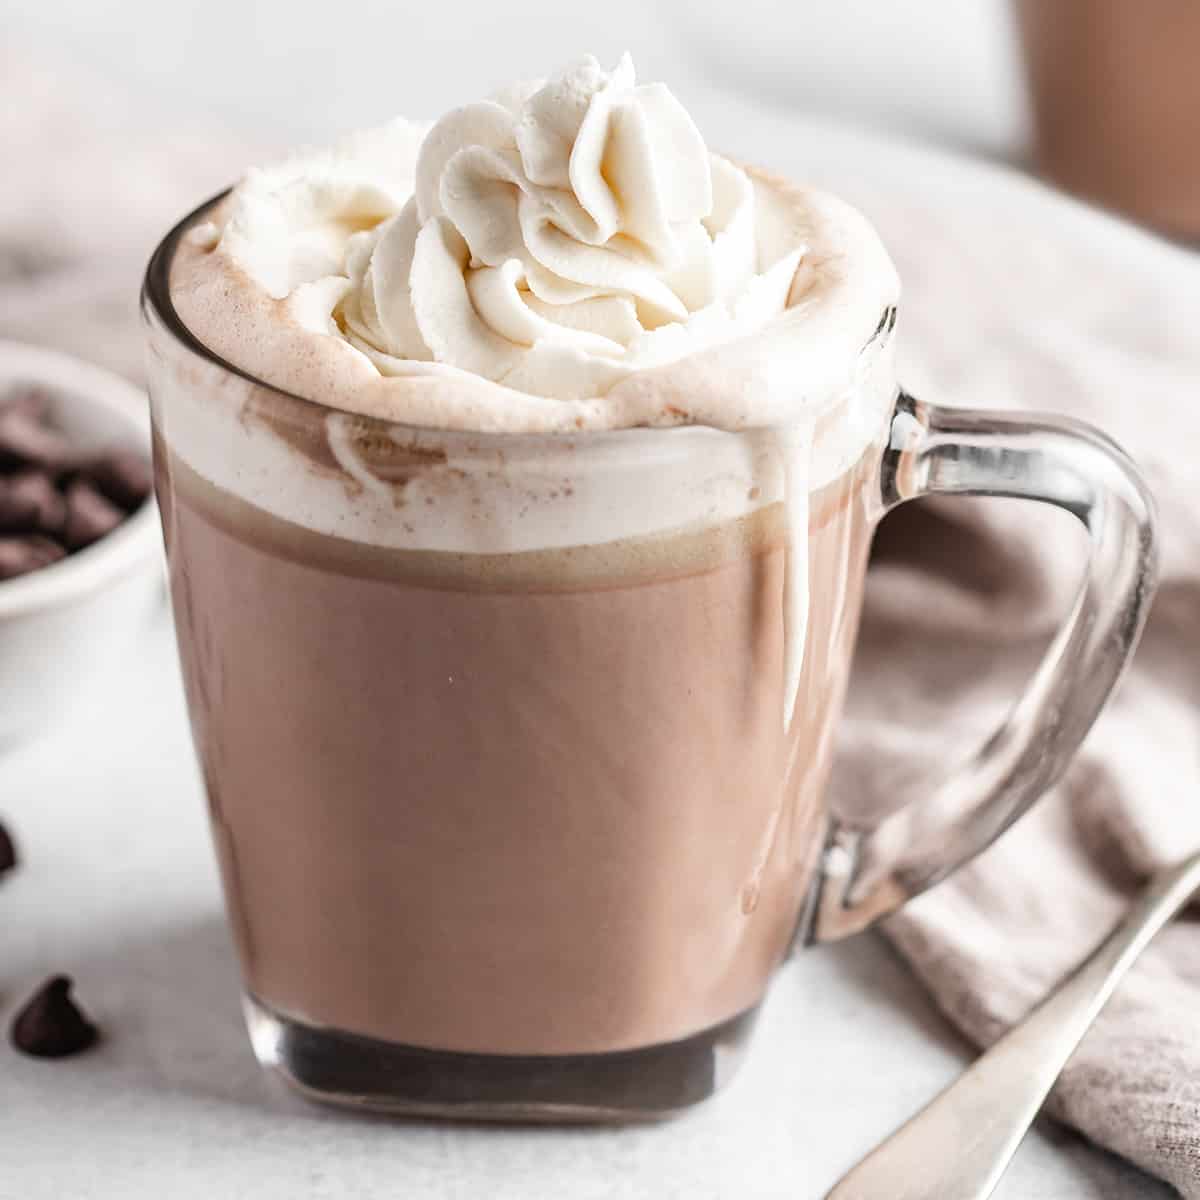 a glass mug full of Crock pot Hot Chocolate topped with whipped cream